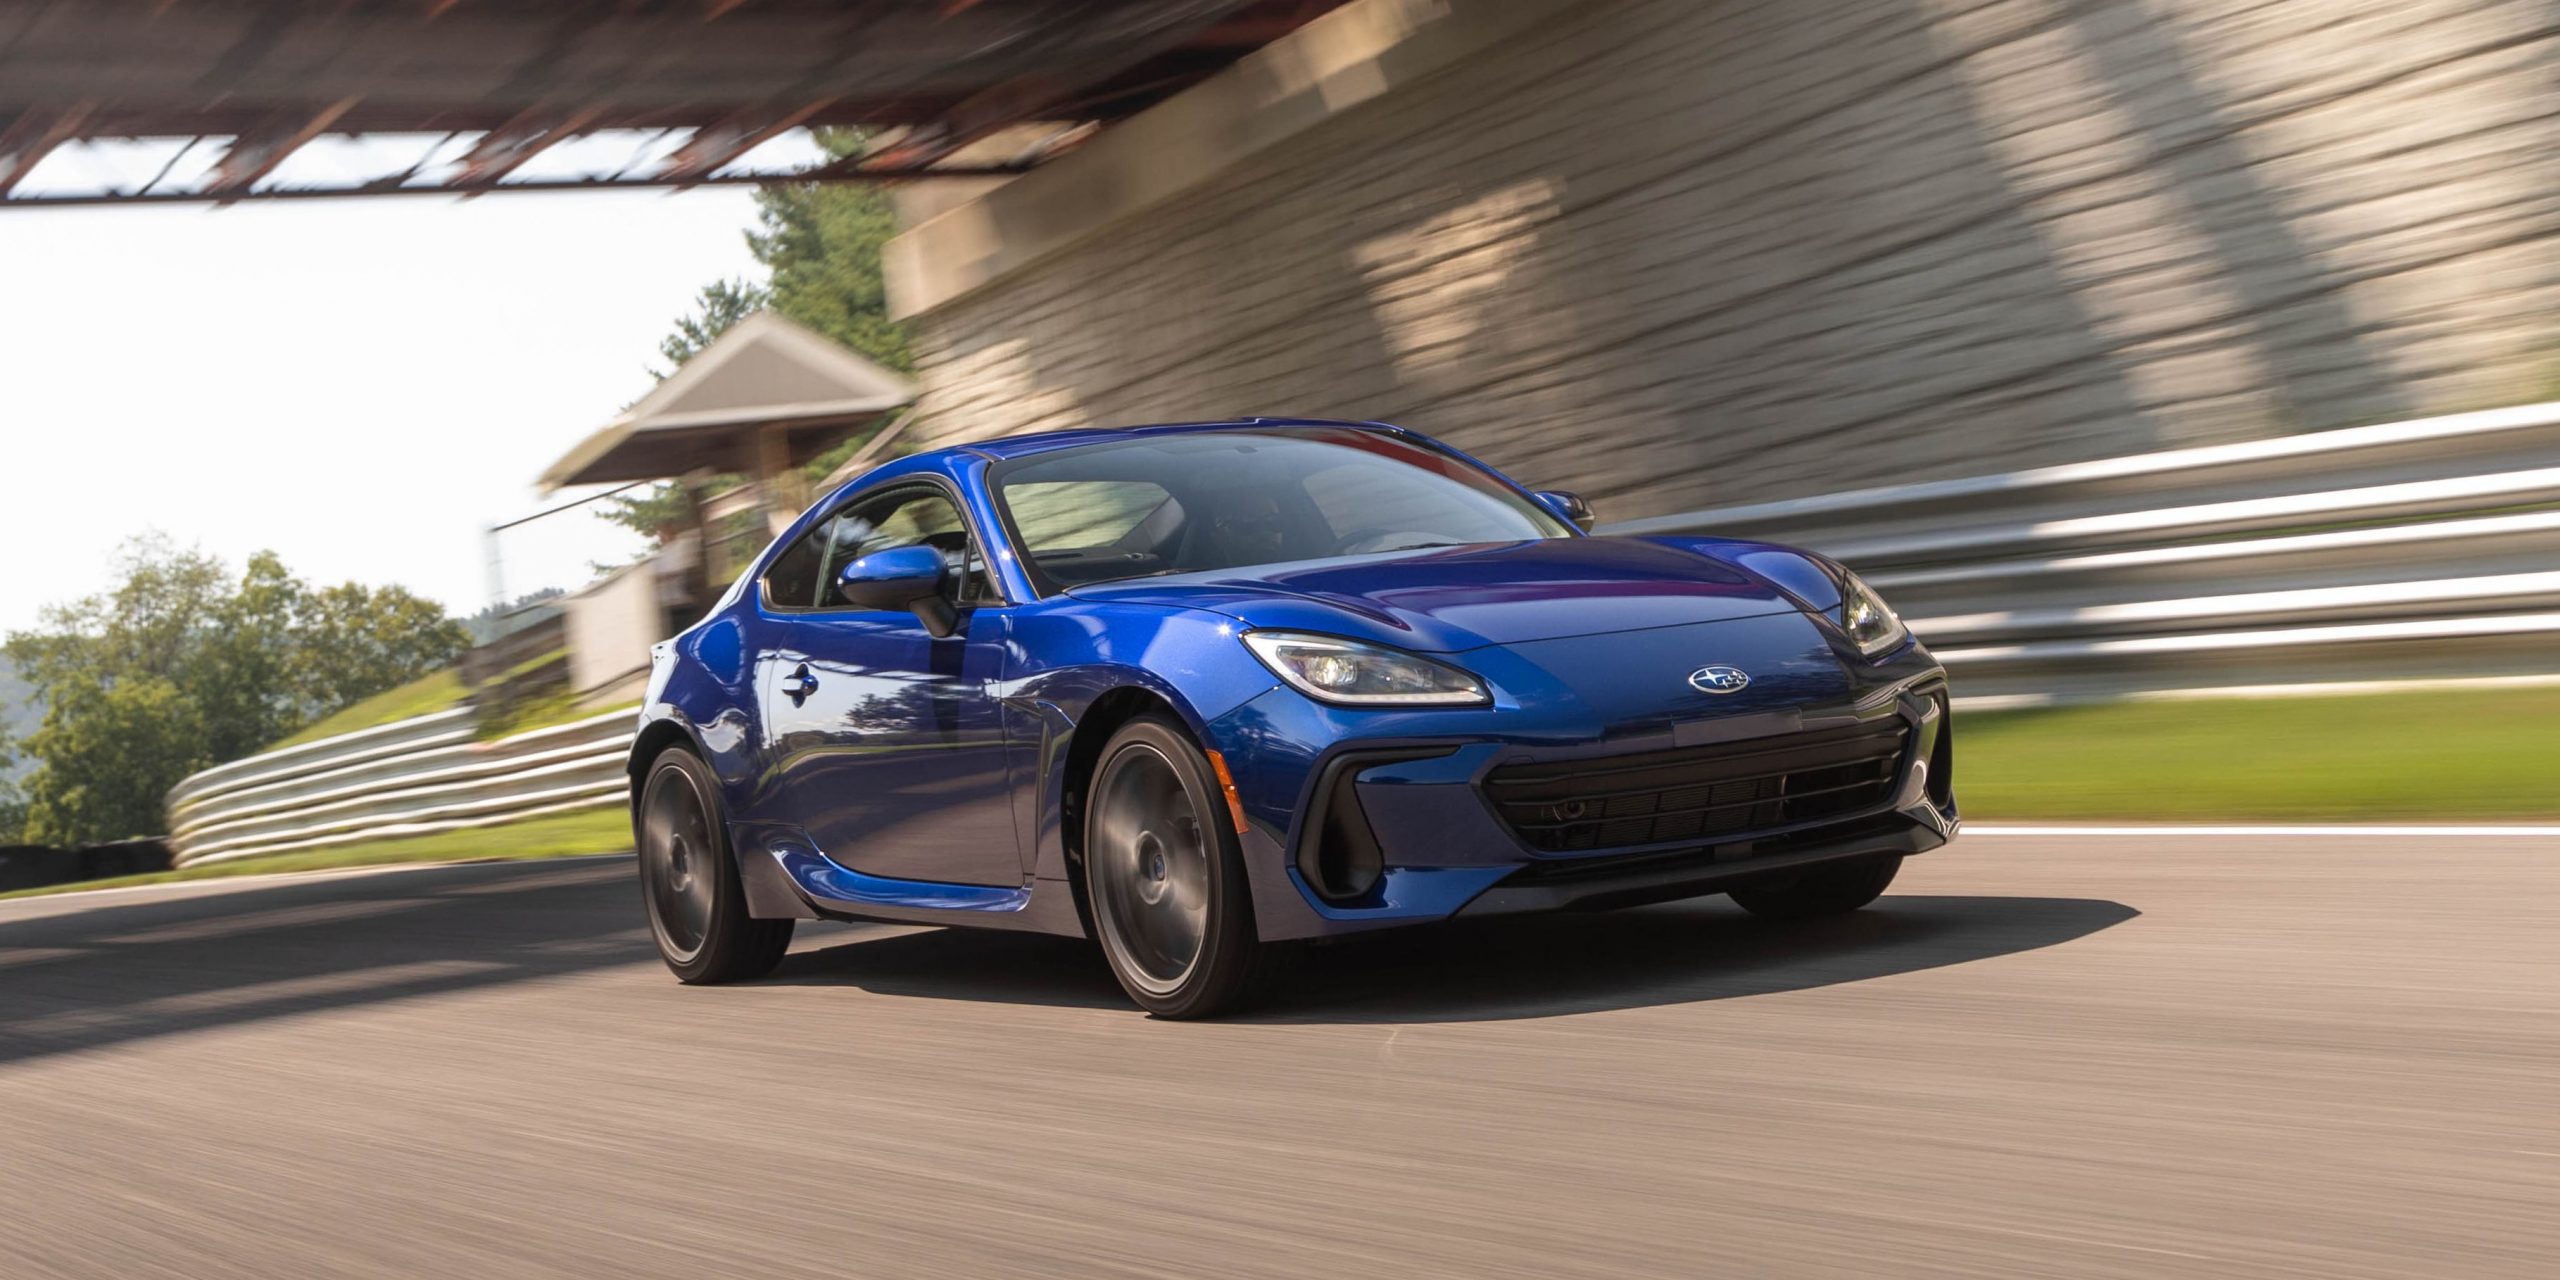 2022 Subaru BRZ Goes After the Kid in You